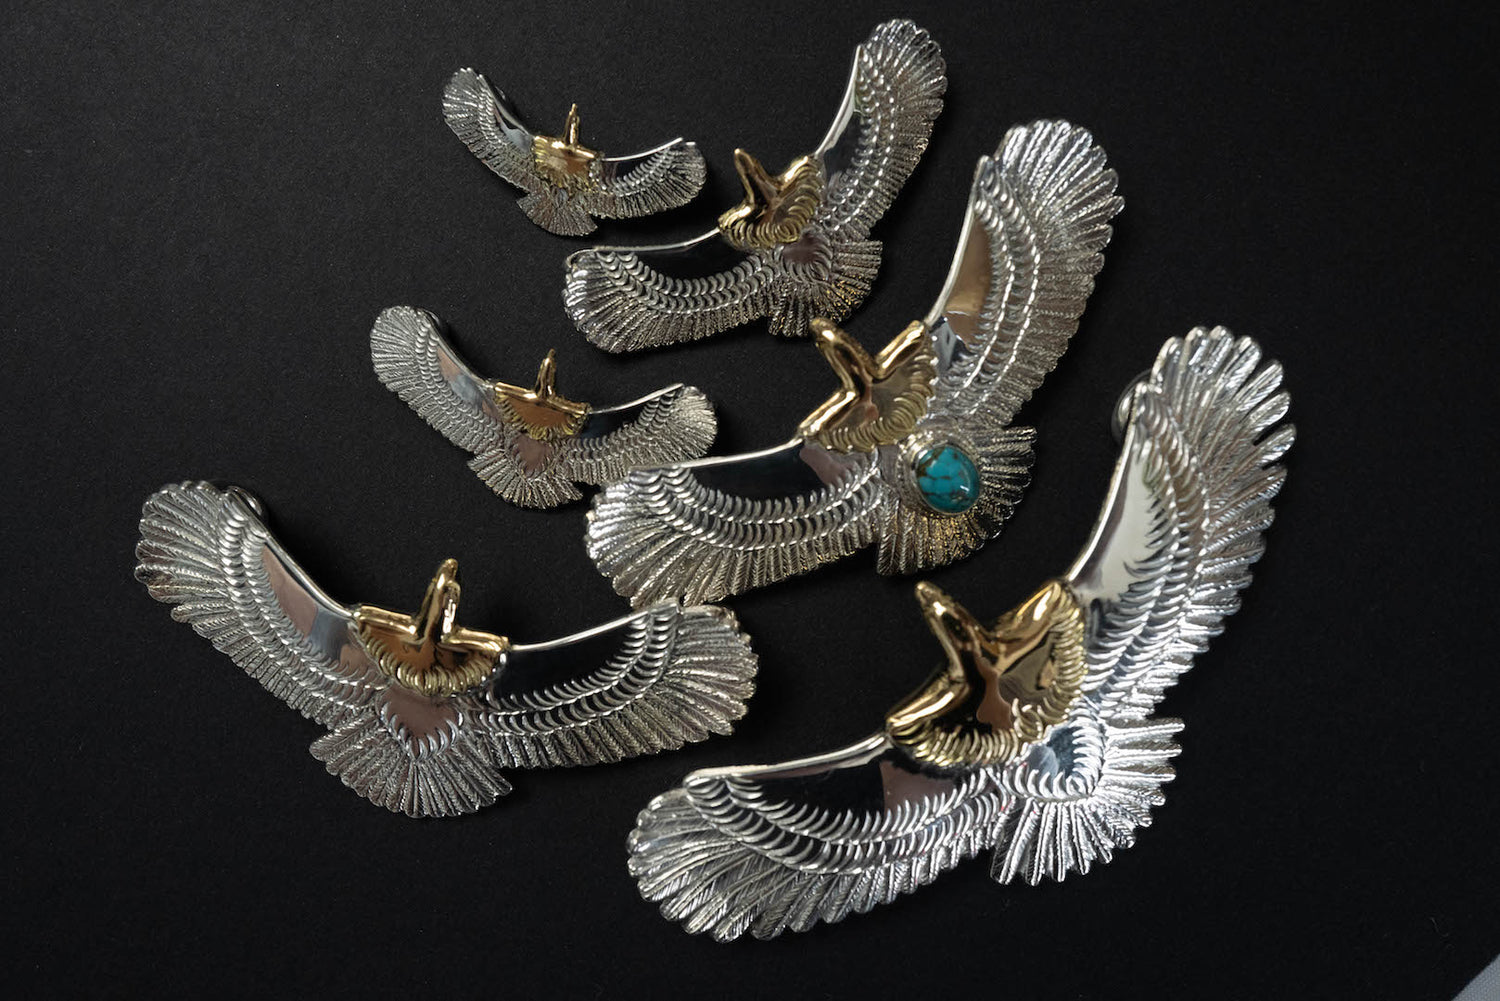 FIRST ARROW'S EAGLE PENDANTS WITH 18K GOLD HEAD